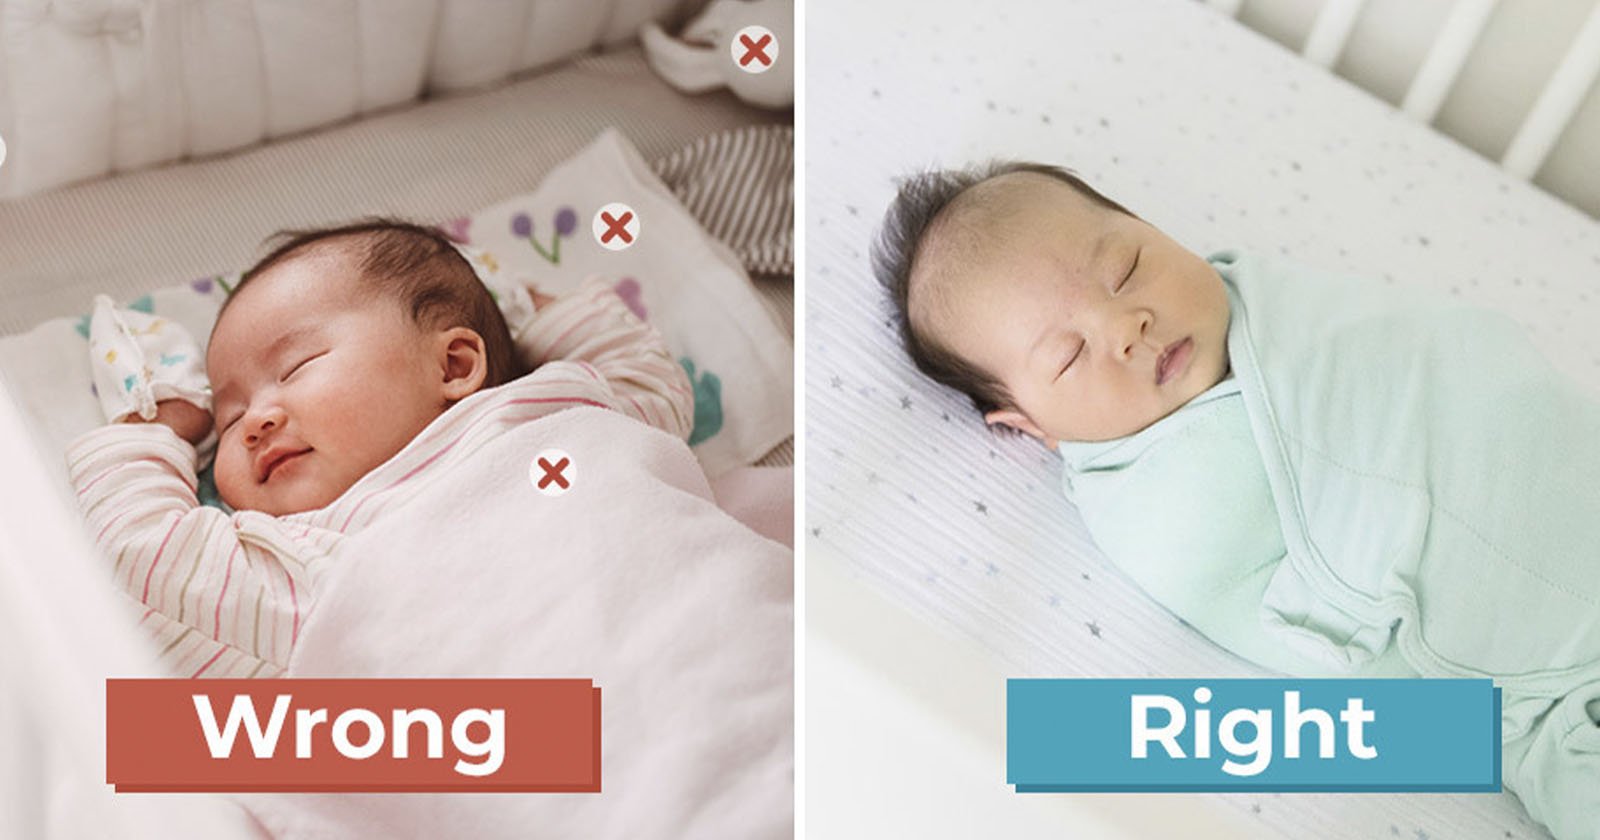 3 Out of 4 Stock Photos of Sleeping Babies Show 'Unsafe' Spaces, Study Finds